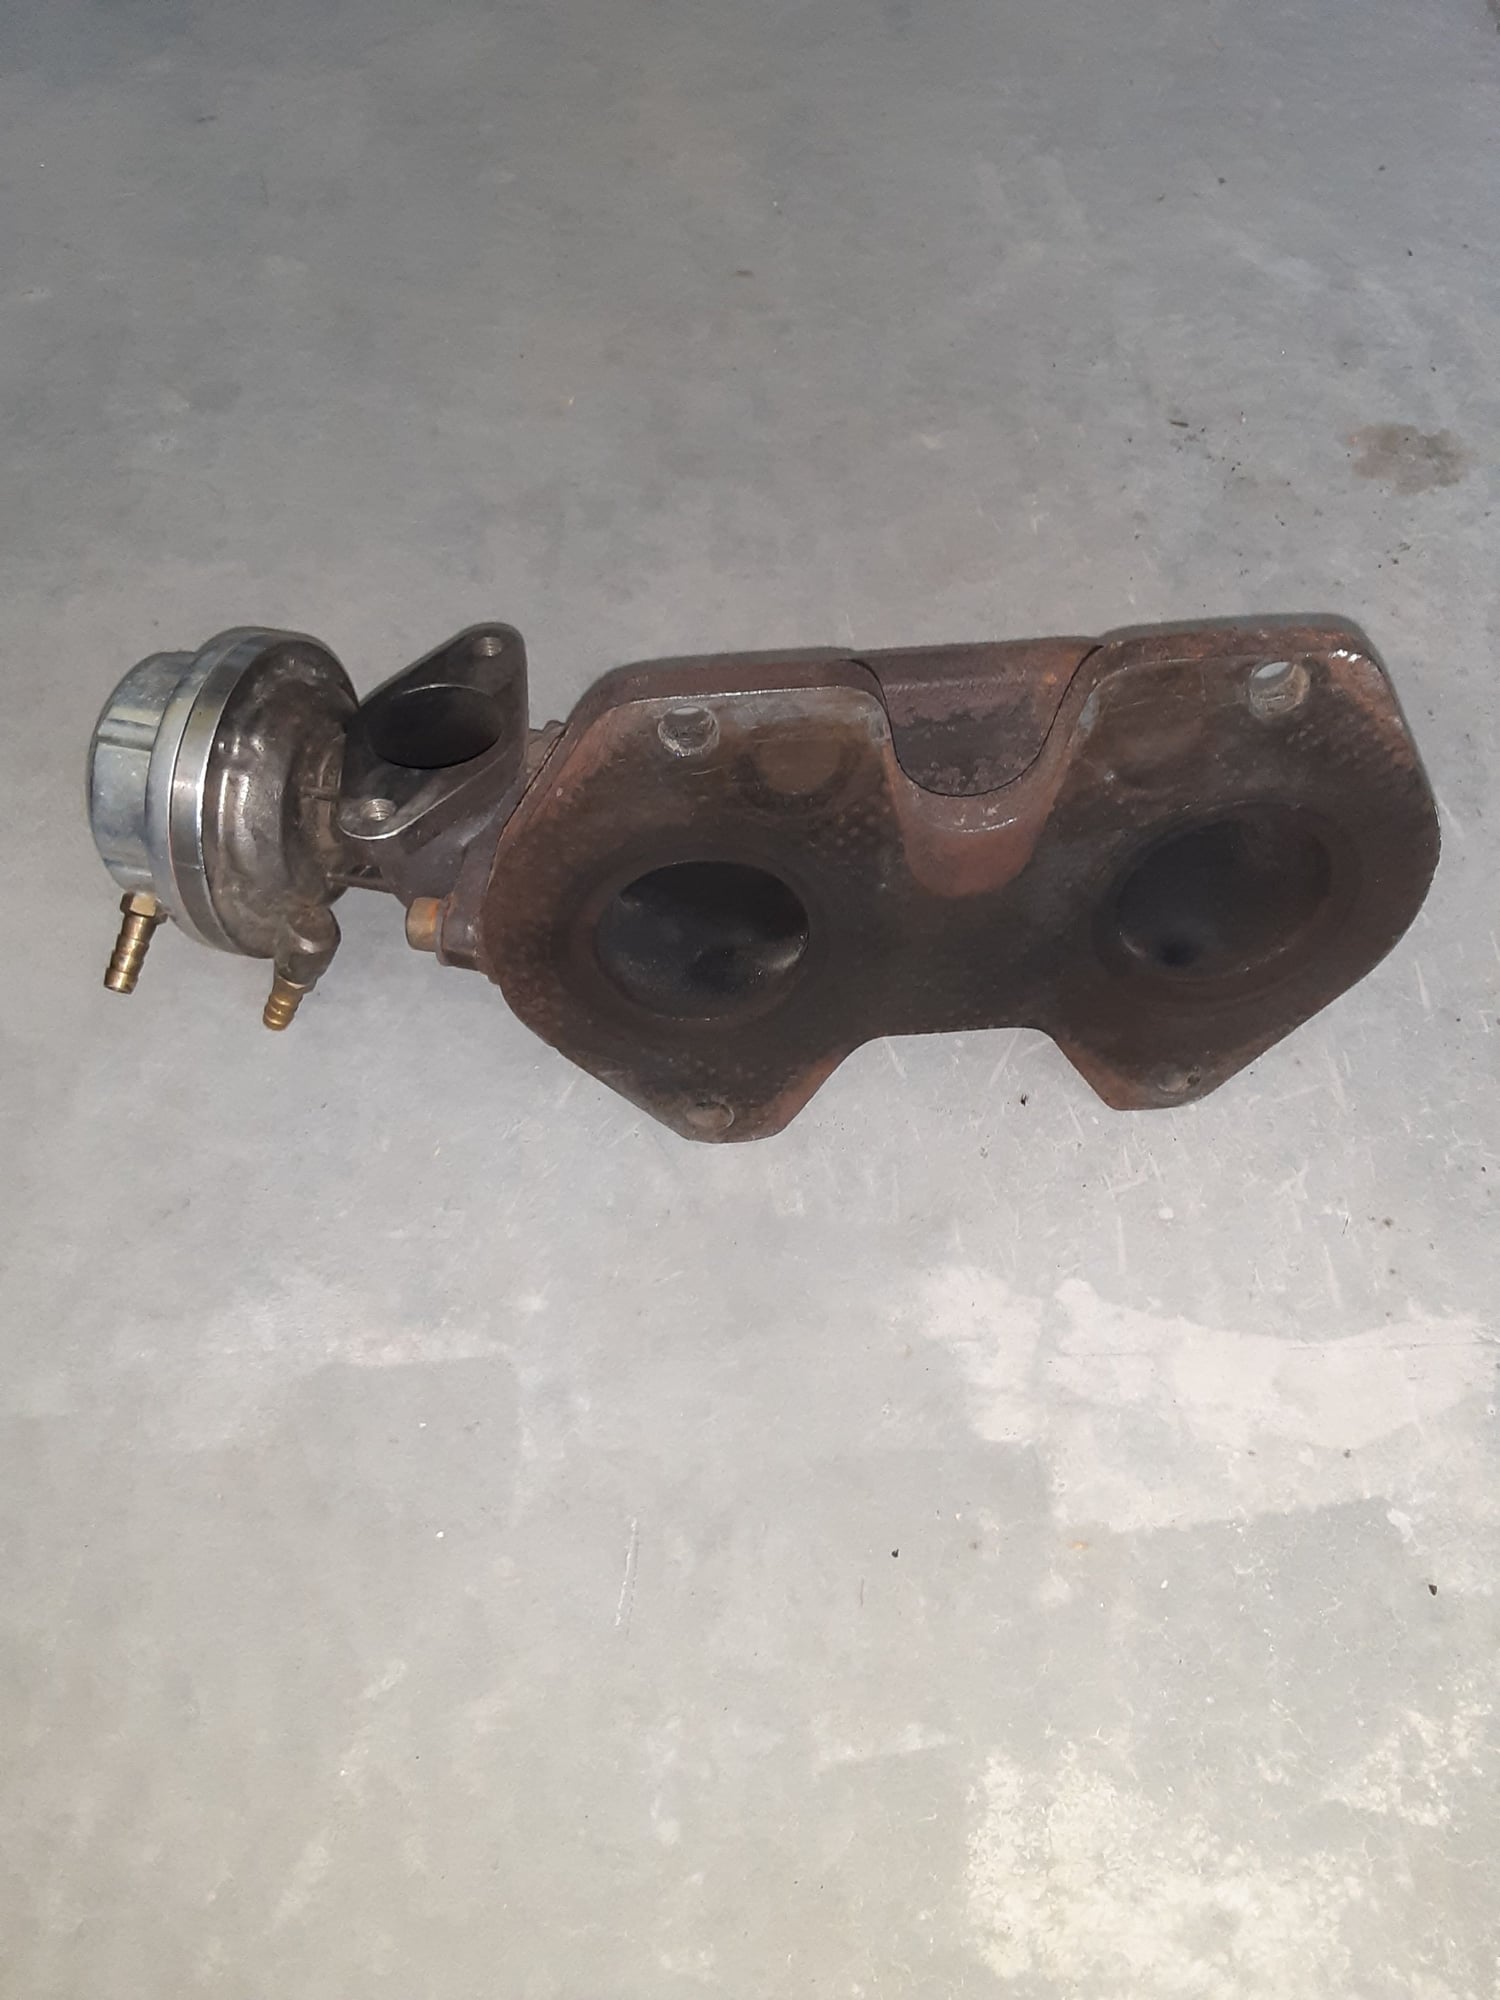 1979 Mazda RX-7 - Cartech exhaust manifold, turbonetics T4 exhaust housing - Engine - Exhaust - $225 - Montrose, CO 81401, United States